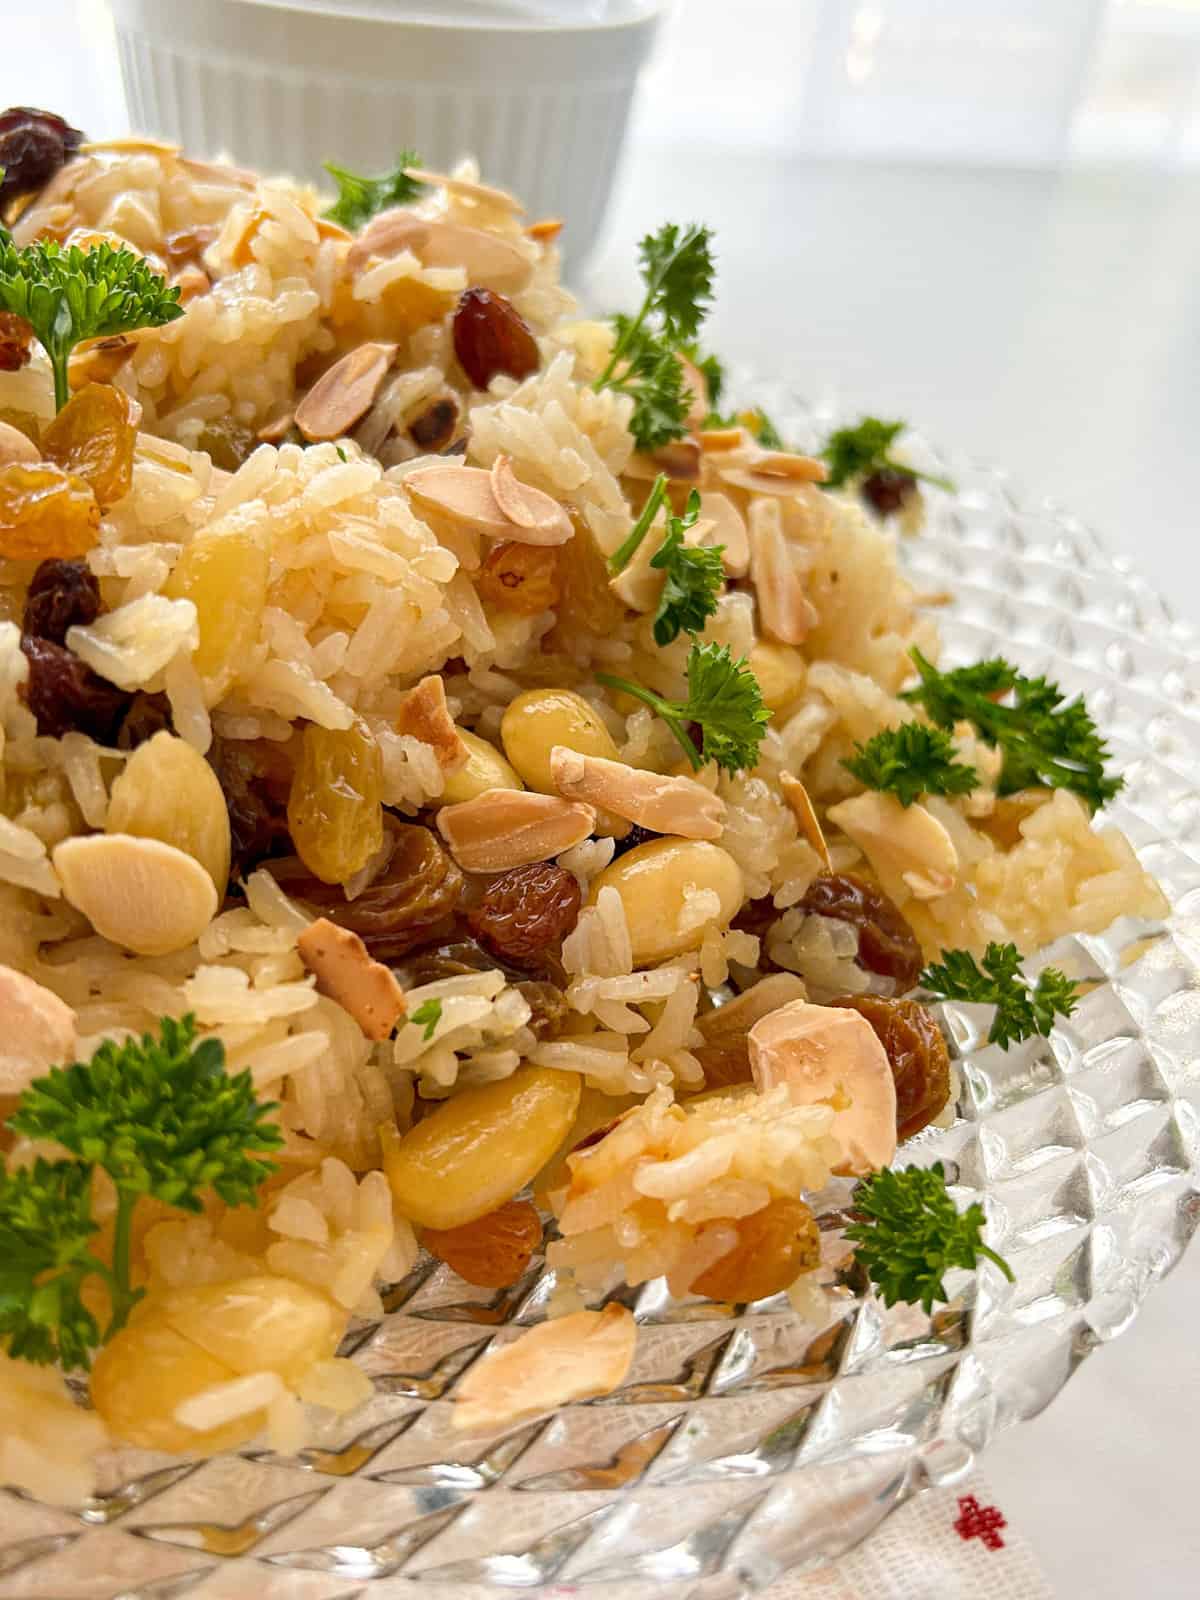 Jaíne Mackievicz’s Pilaf Recipe with Dried Fruit and Nuts